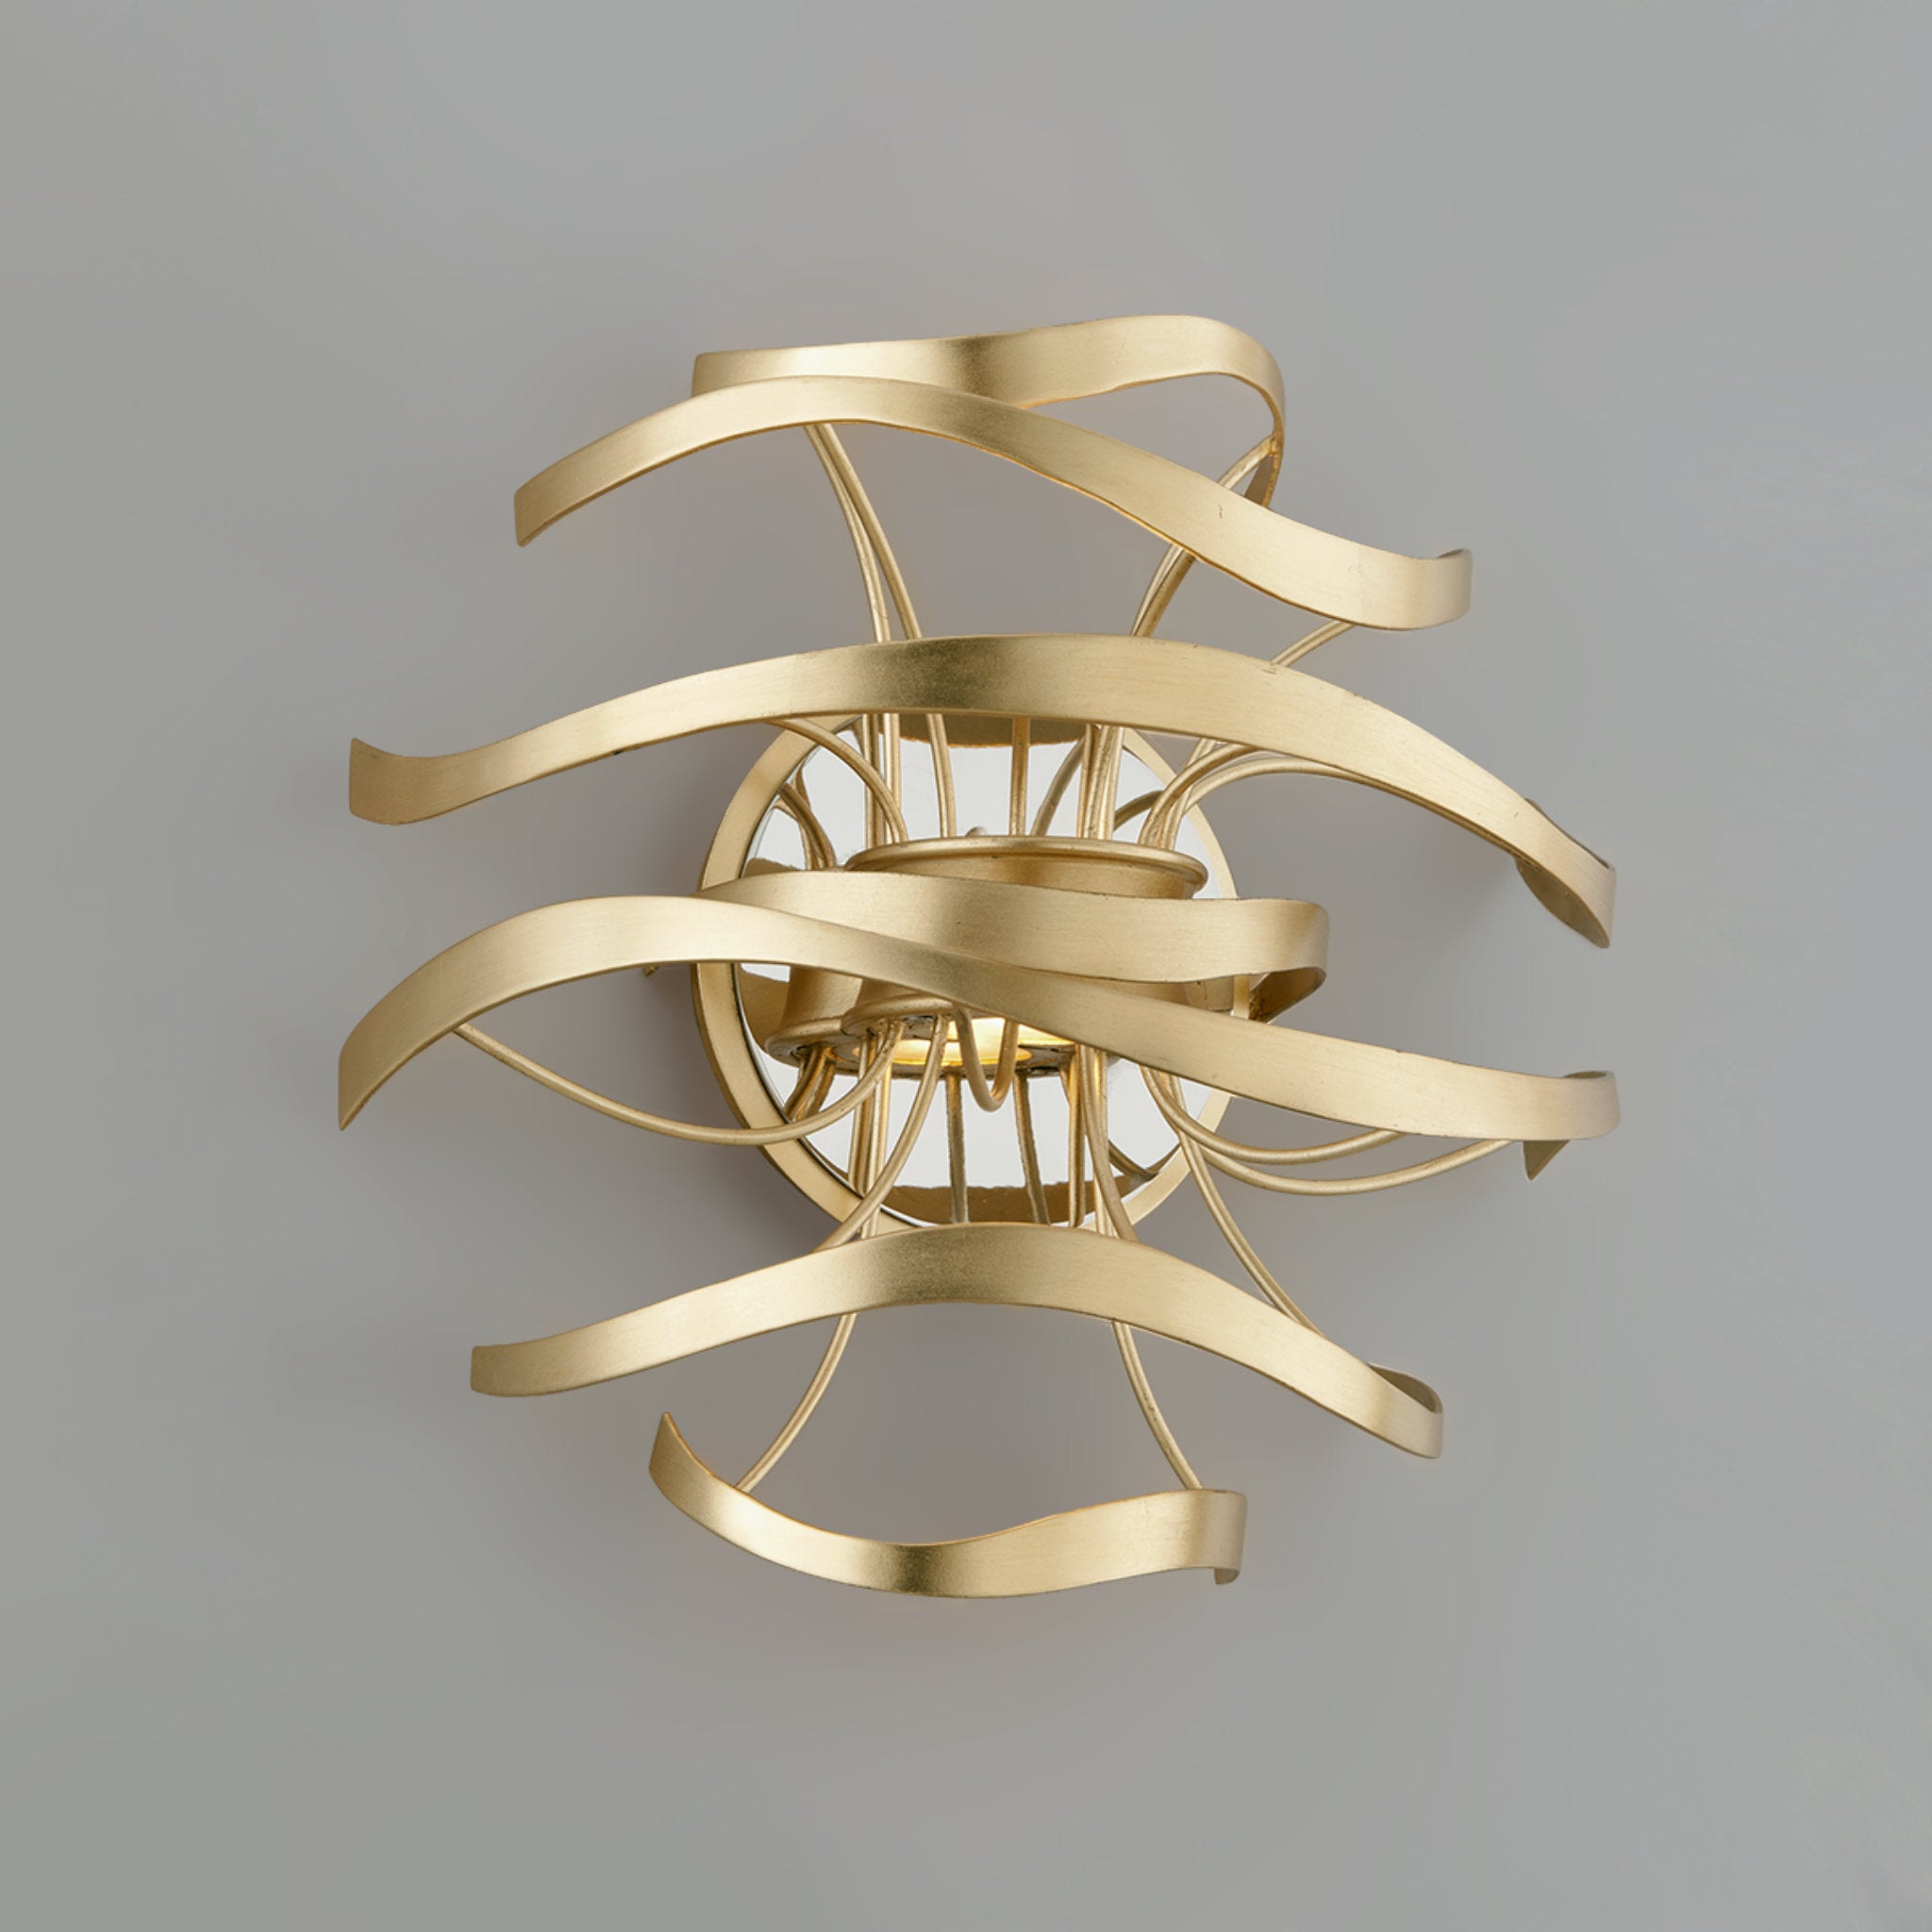 Calligraphy 2 Light Wall Sconce in Gold Leaf W Polished Stainless